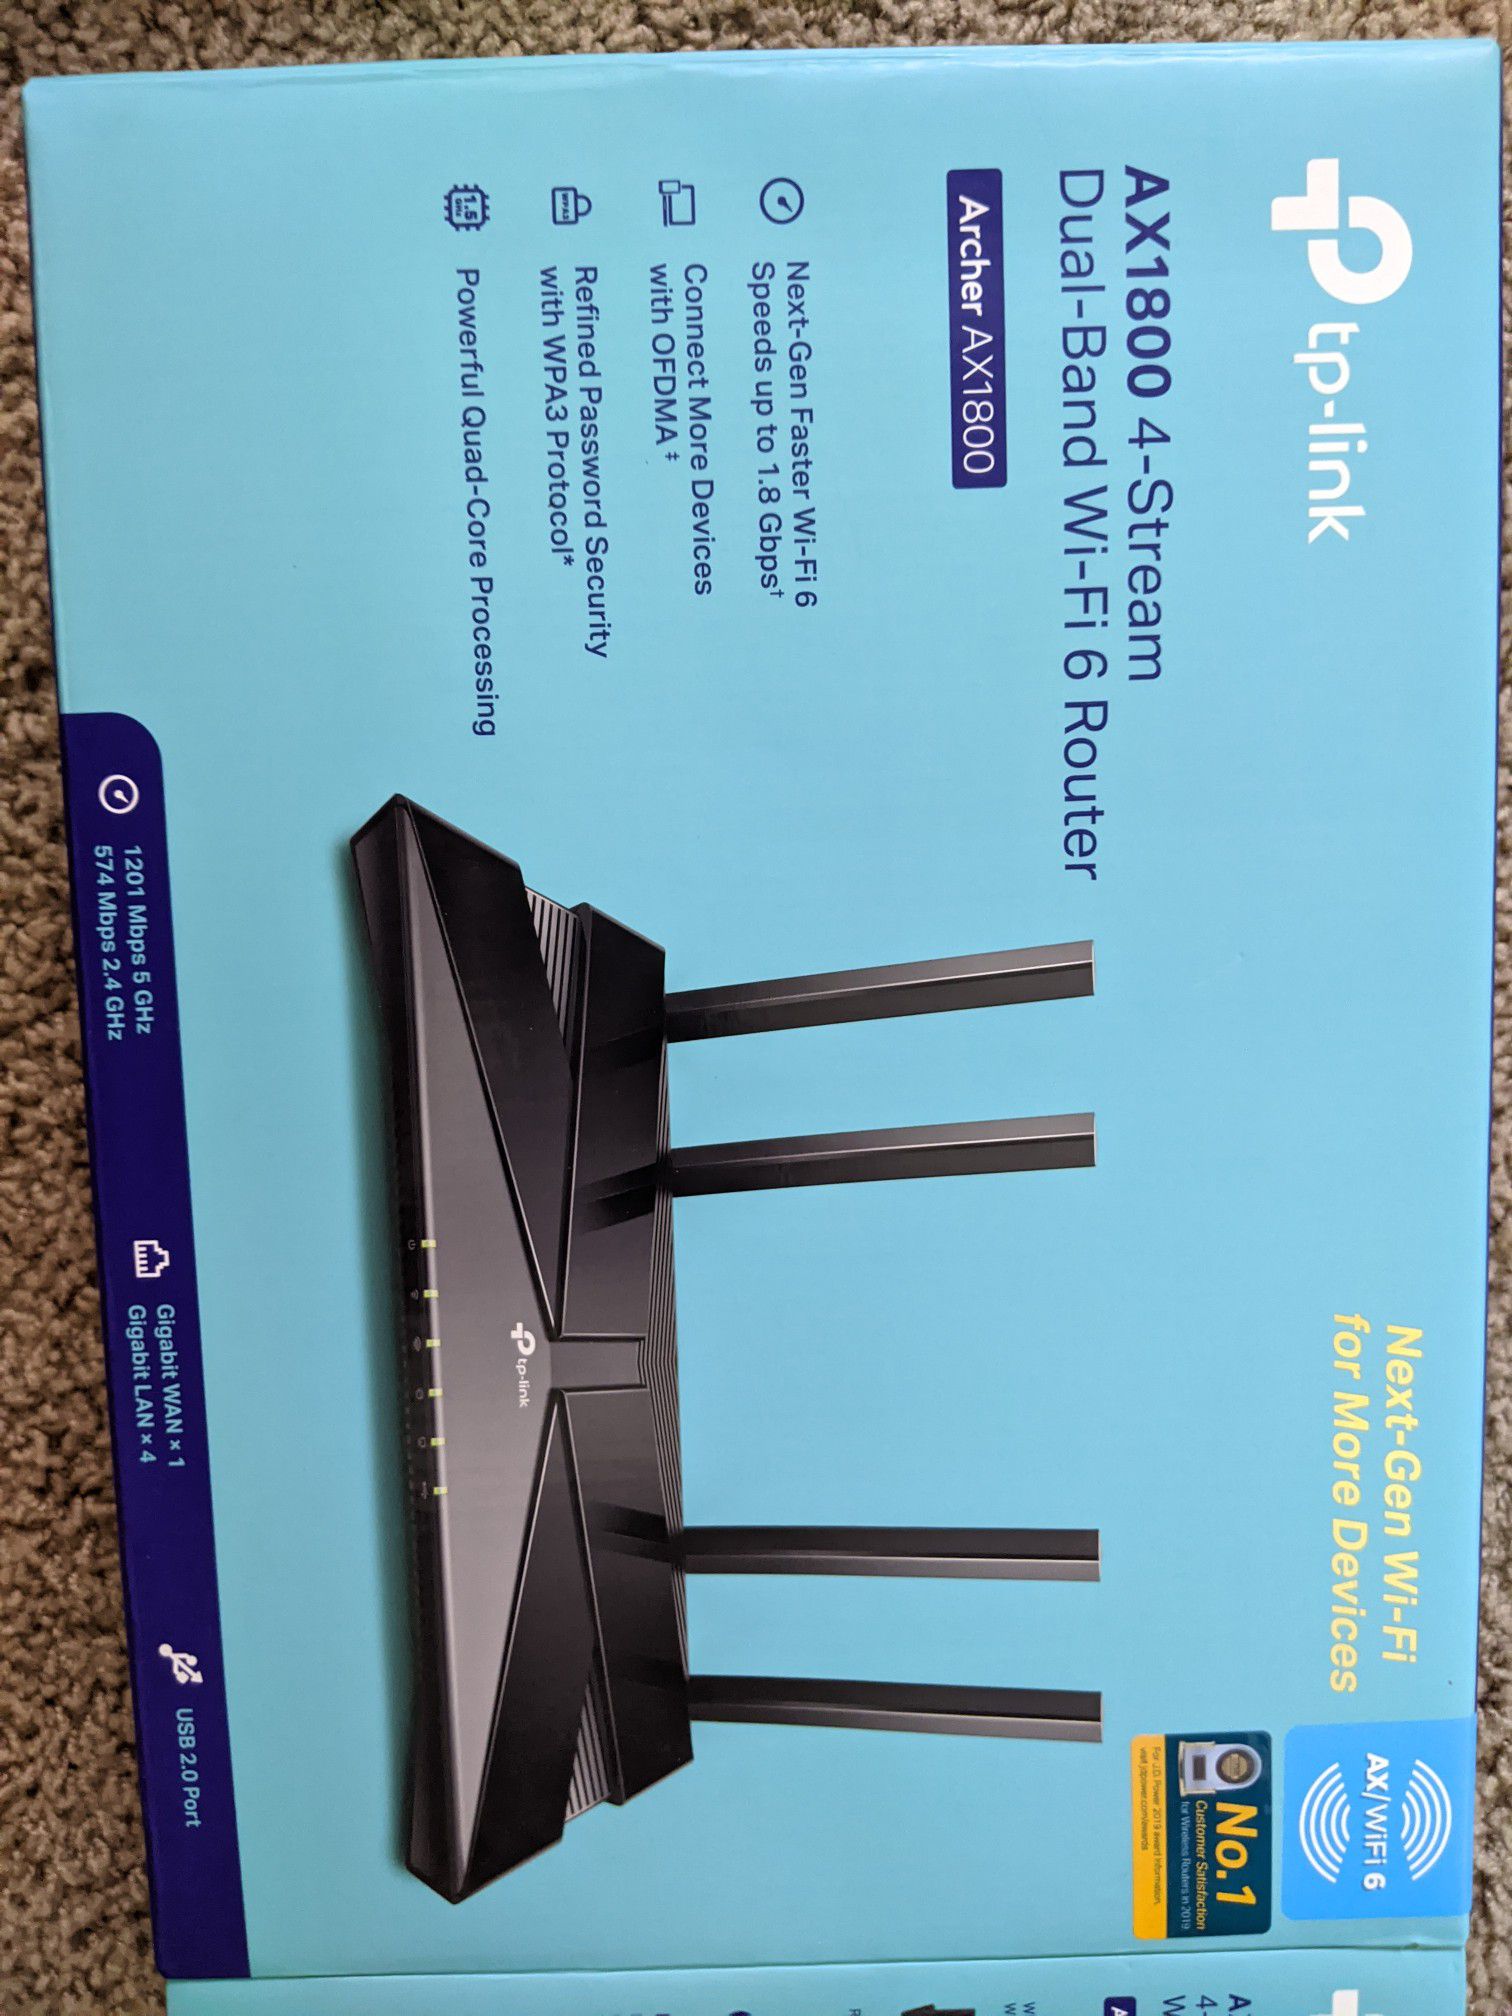 Wifi 6 router (ax1800)